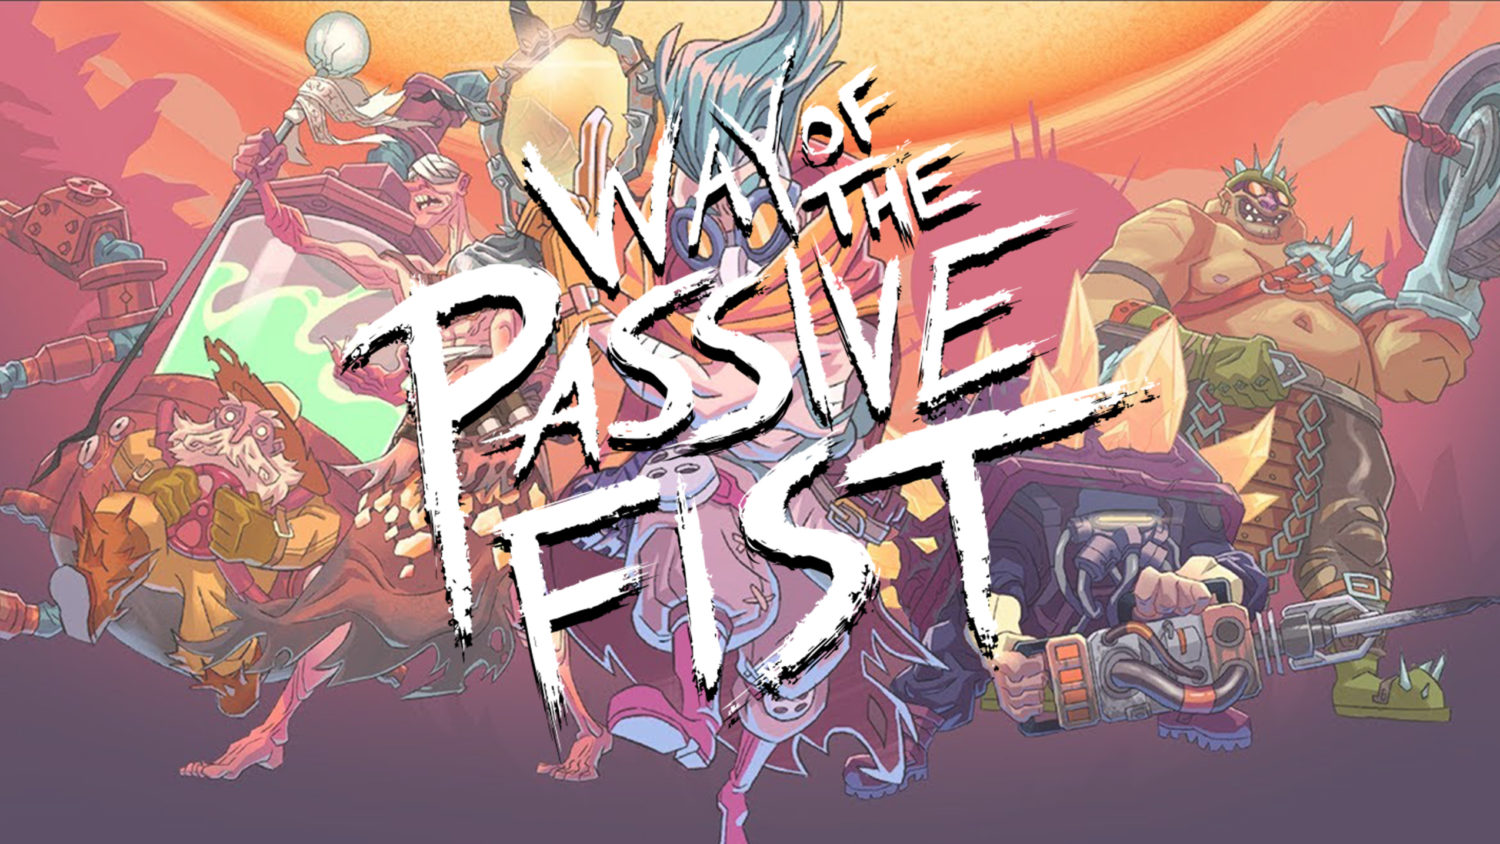 way of the passive fist